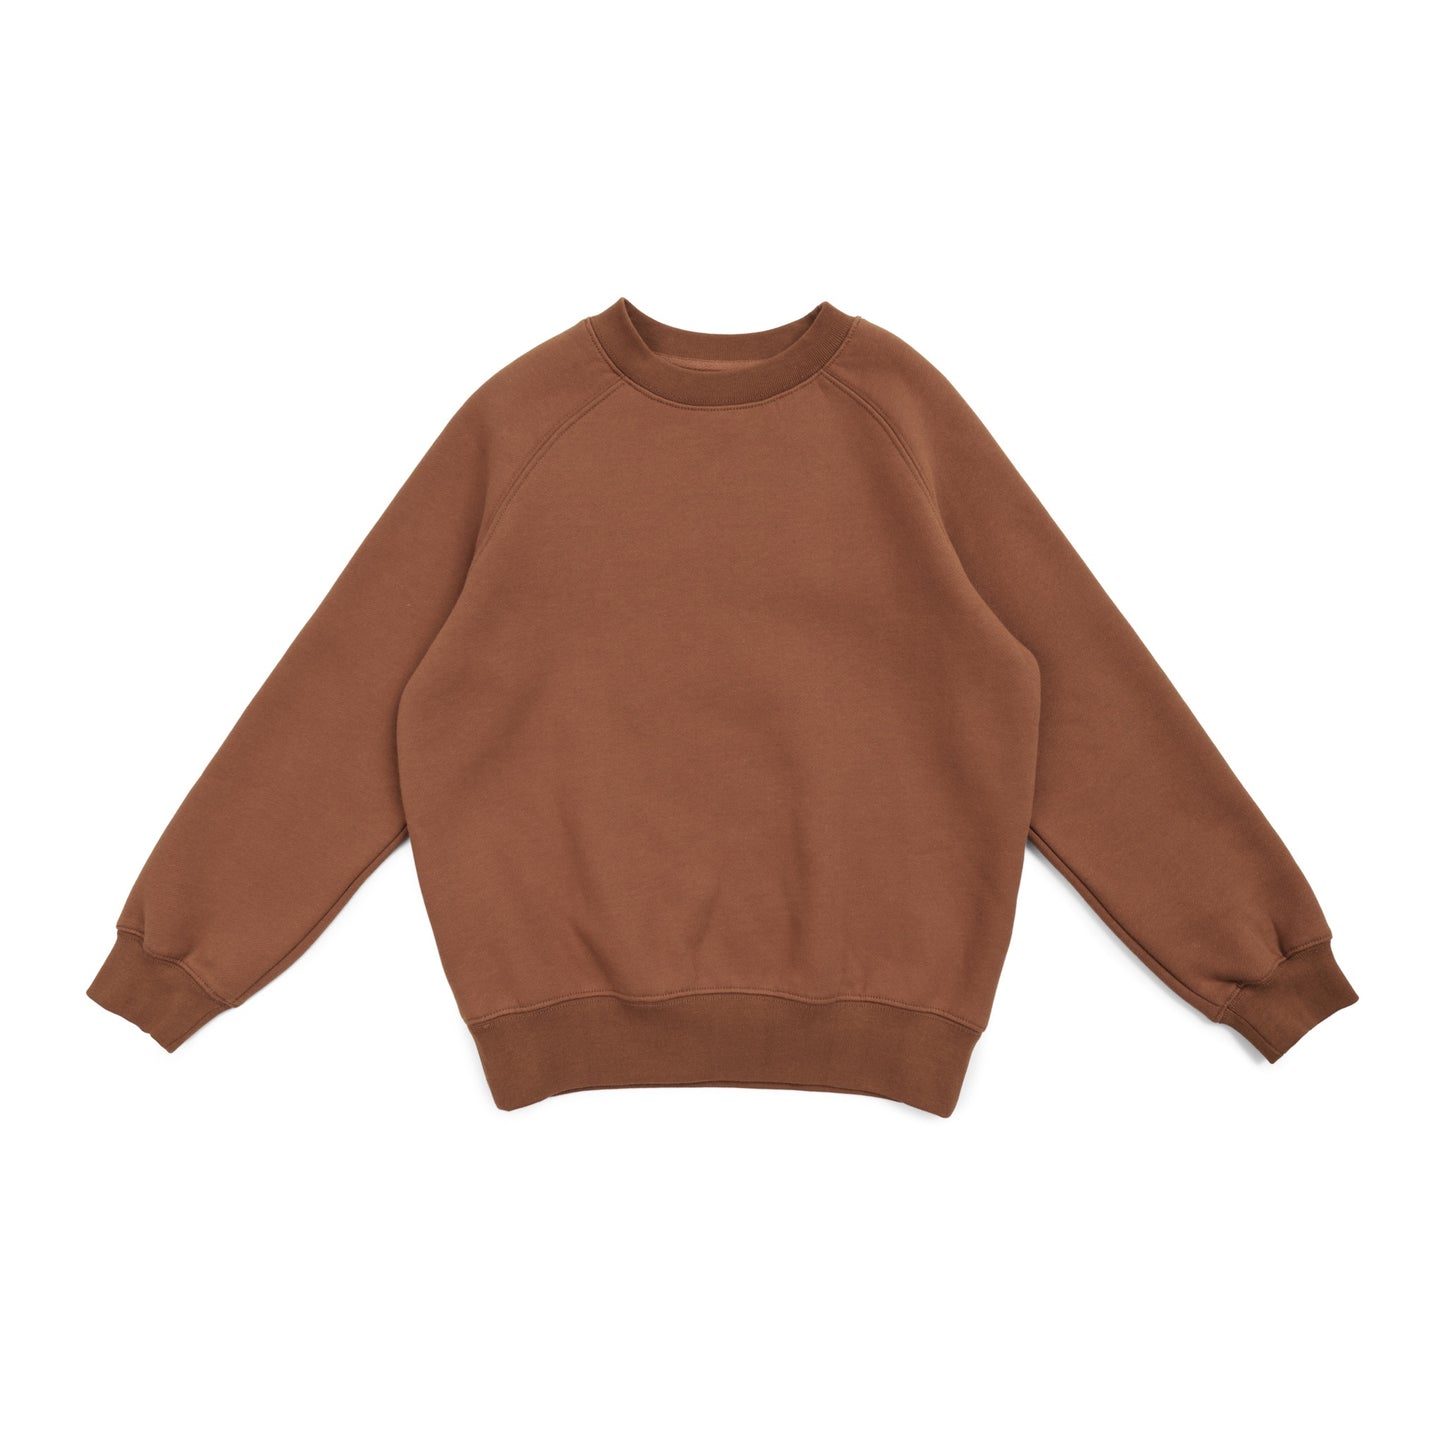 Toffee colour Kids Jumper 